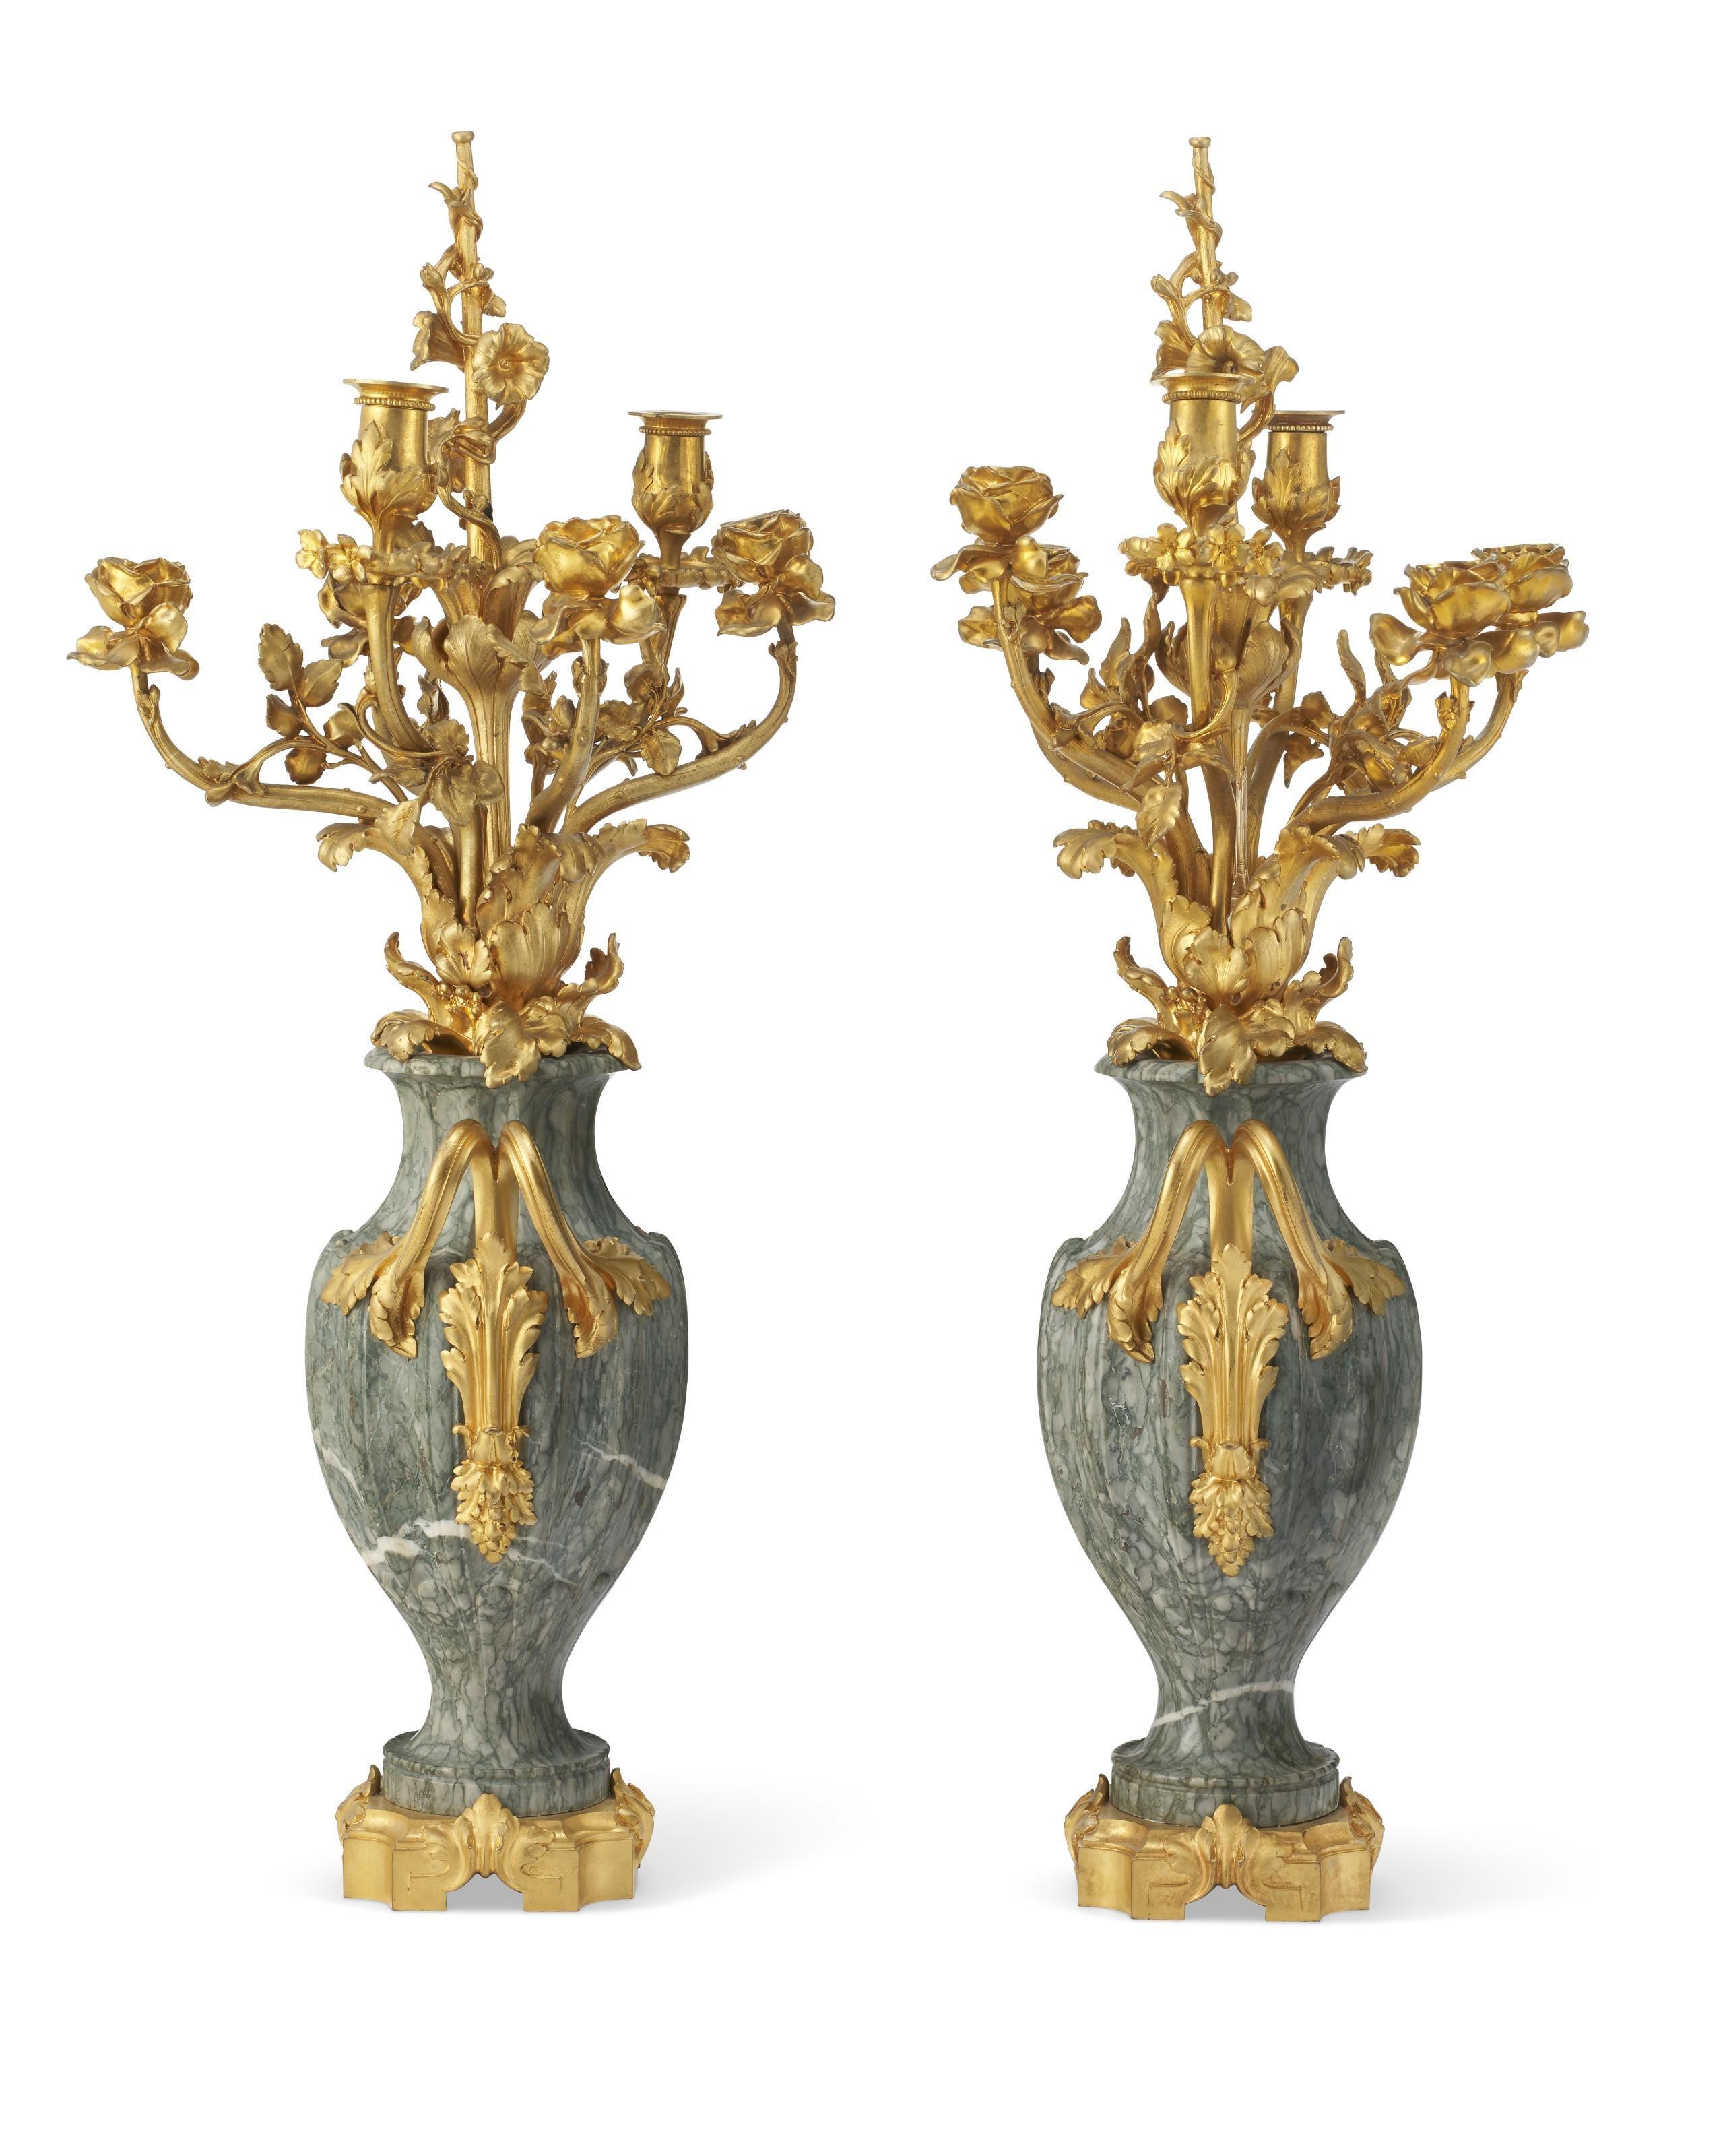 French Art Nouveau Ormolu Bronze and Green Marble Candelabra by F. Rambaud, and cast by the foundry of Susse Freres.  Previously electrified.